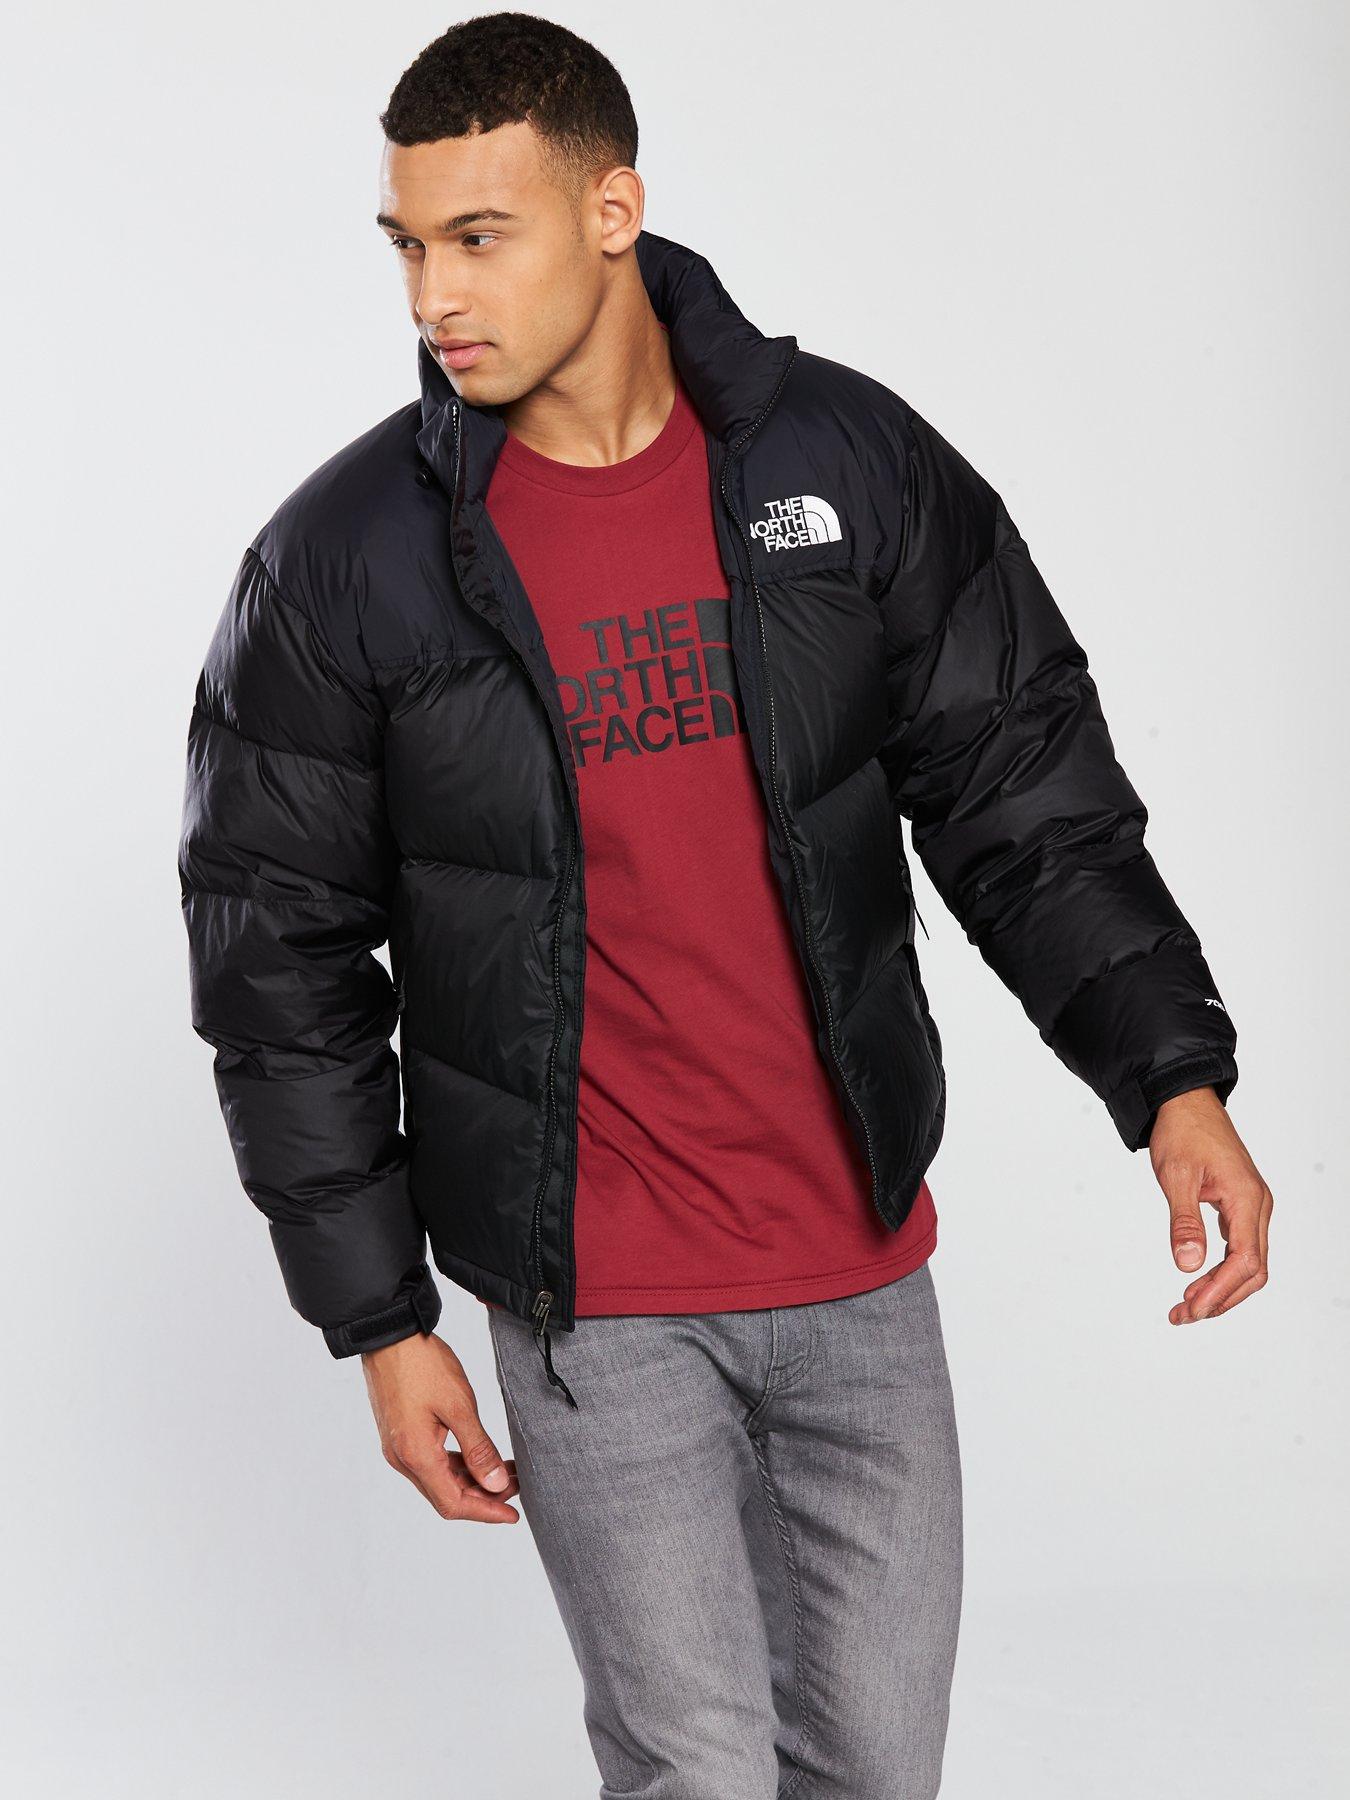 north face puffer jacket mens 